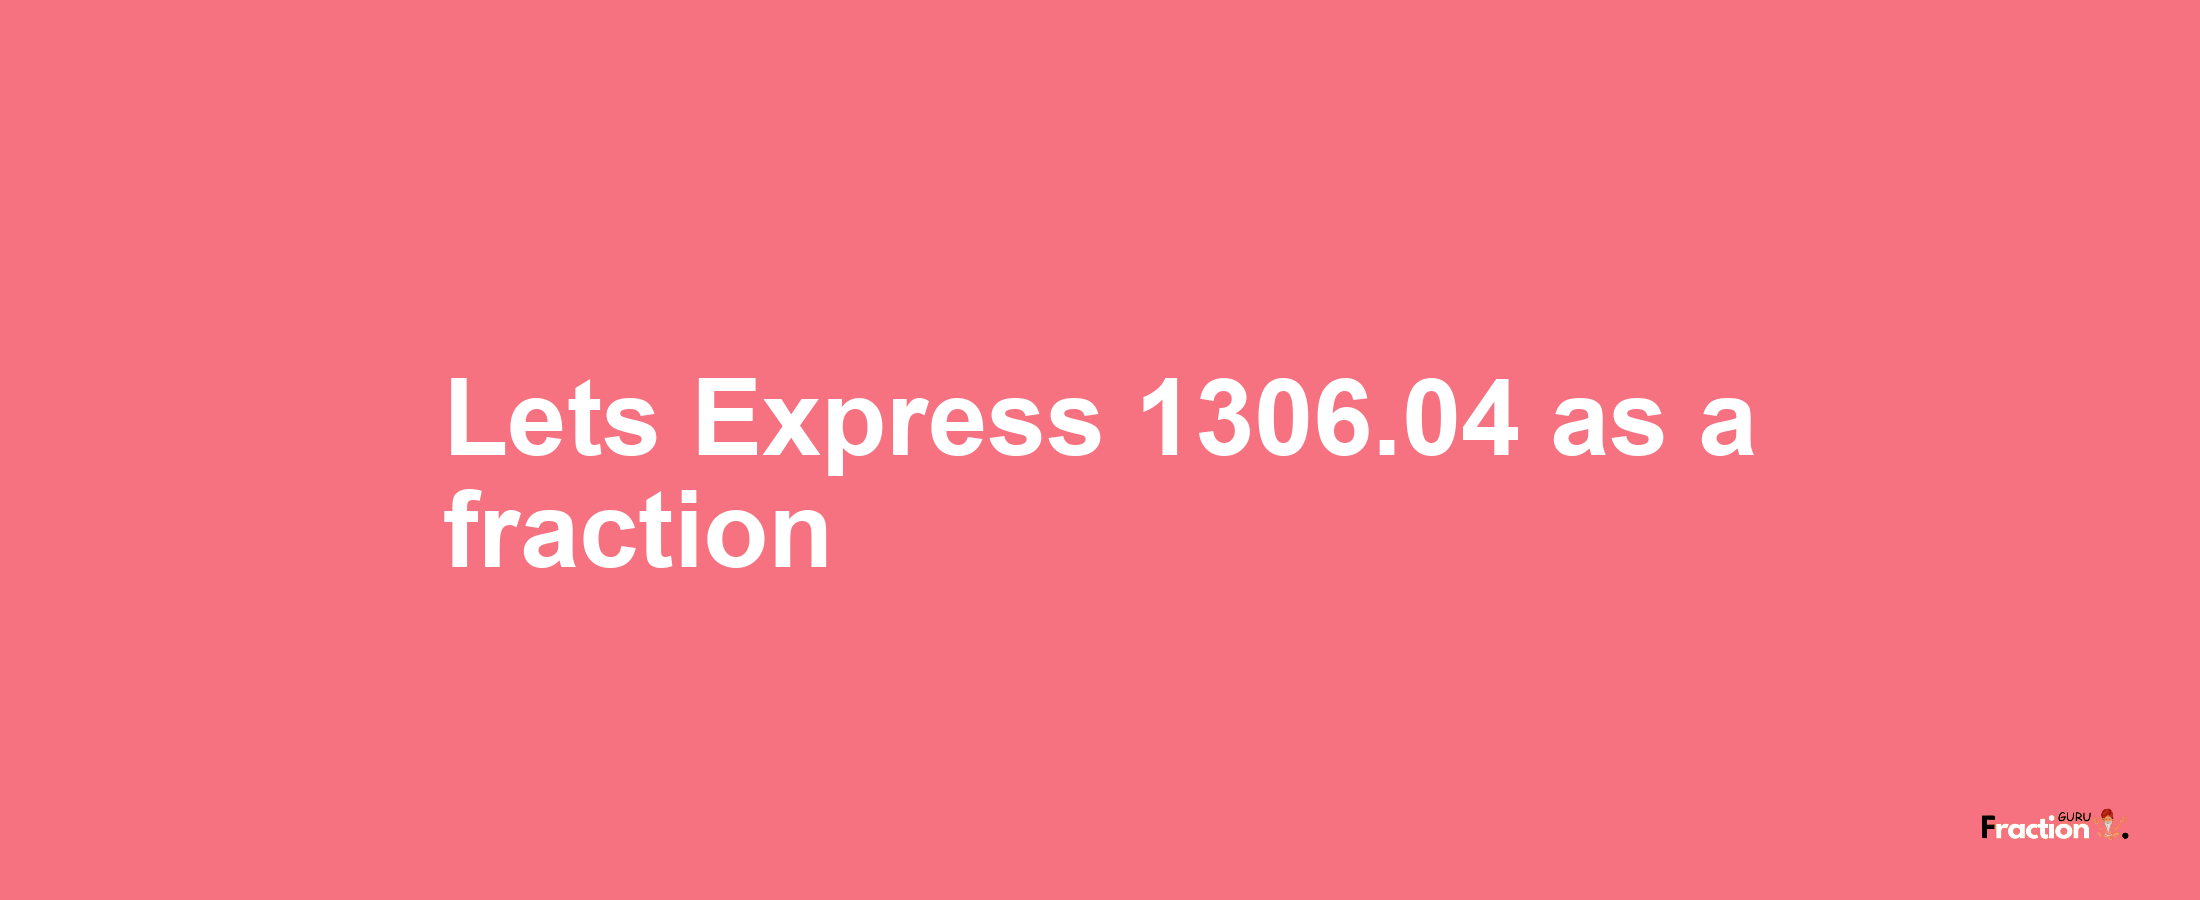 Lets Express 1306.04 as afraction